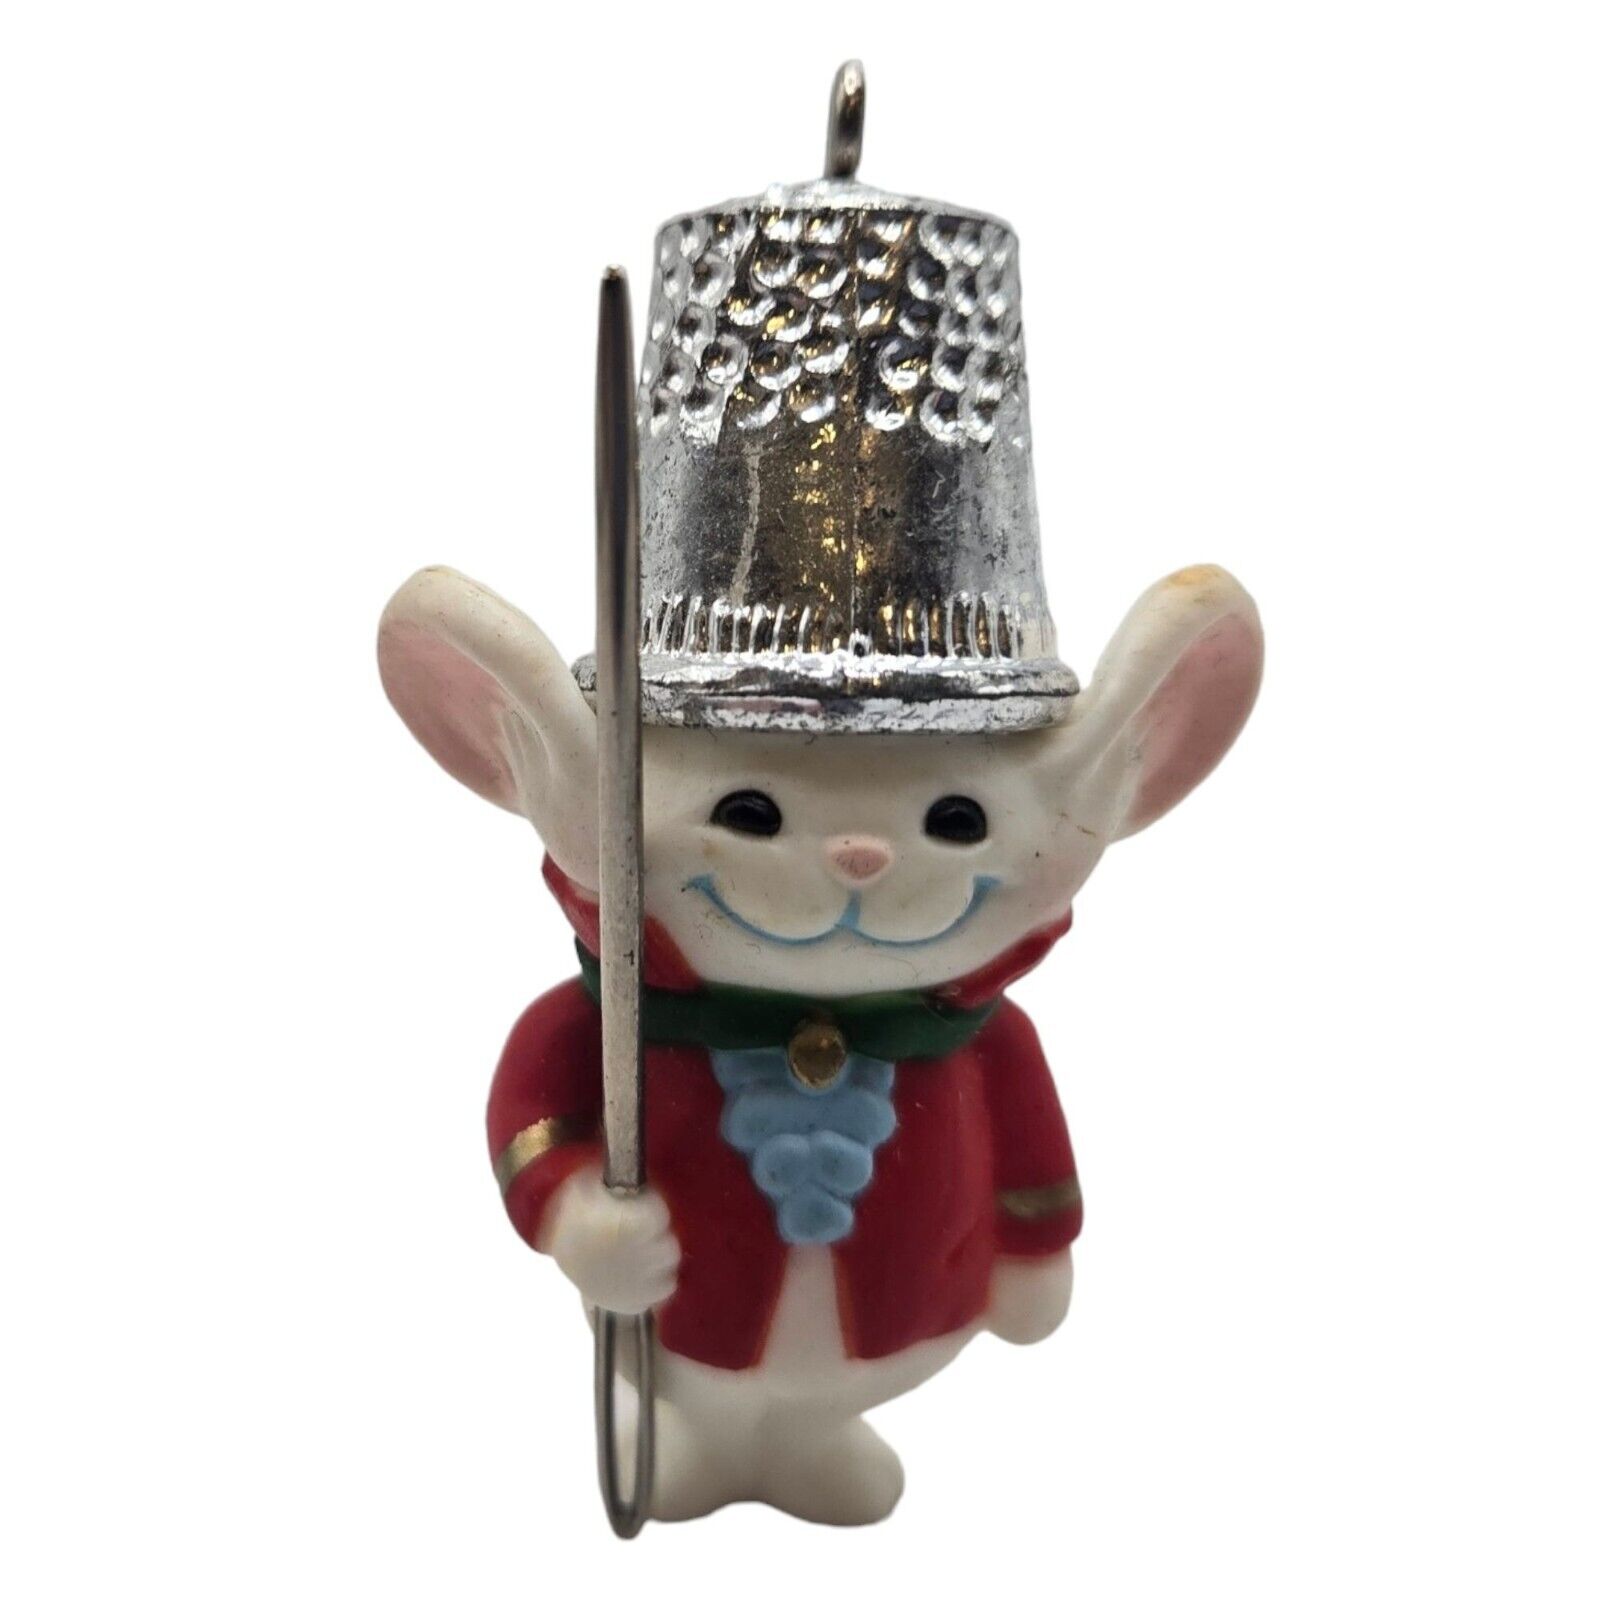 Vintage Mouse Soldier Ornament Sewing Thimble Needle 1982 Hallmark Ornament